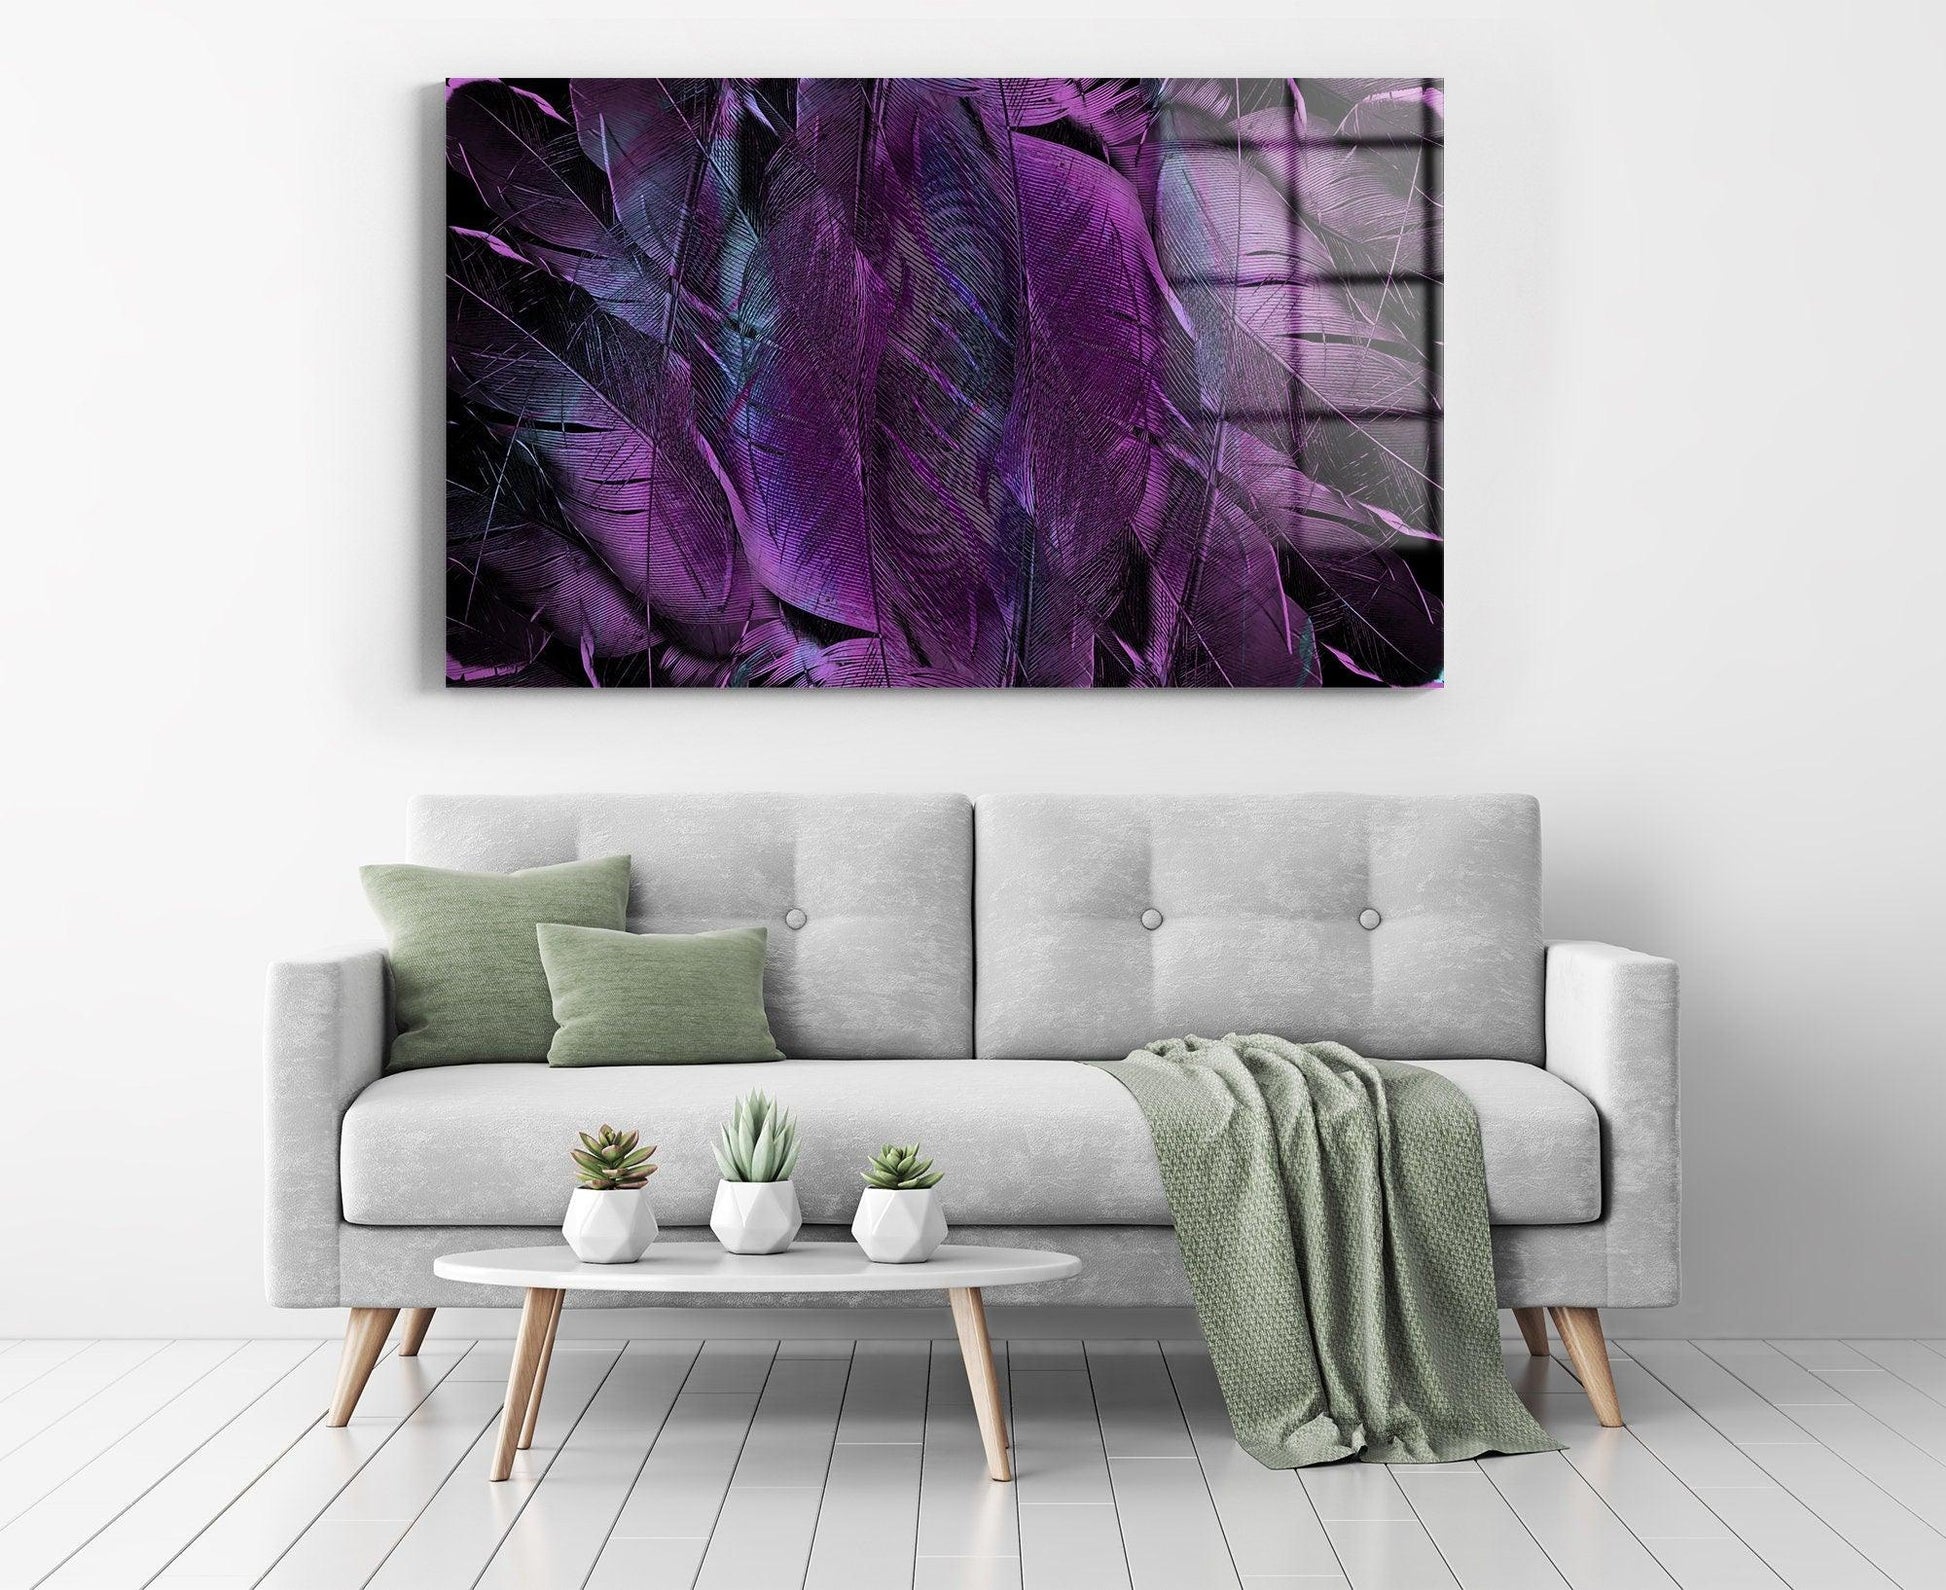 colorful Wall Art| UV Digital Printed, colorful Stones canvas wall art, stone Wall Decor, handmade furniture, stained glass wall art modern - TrendiArt